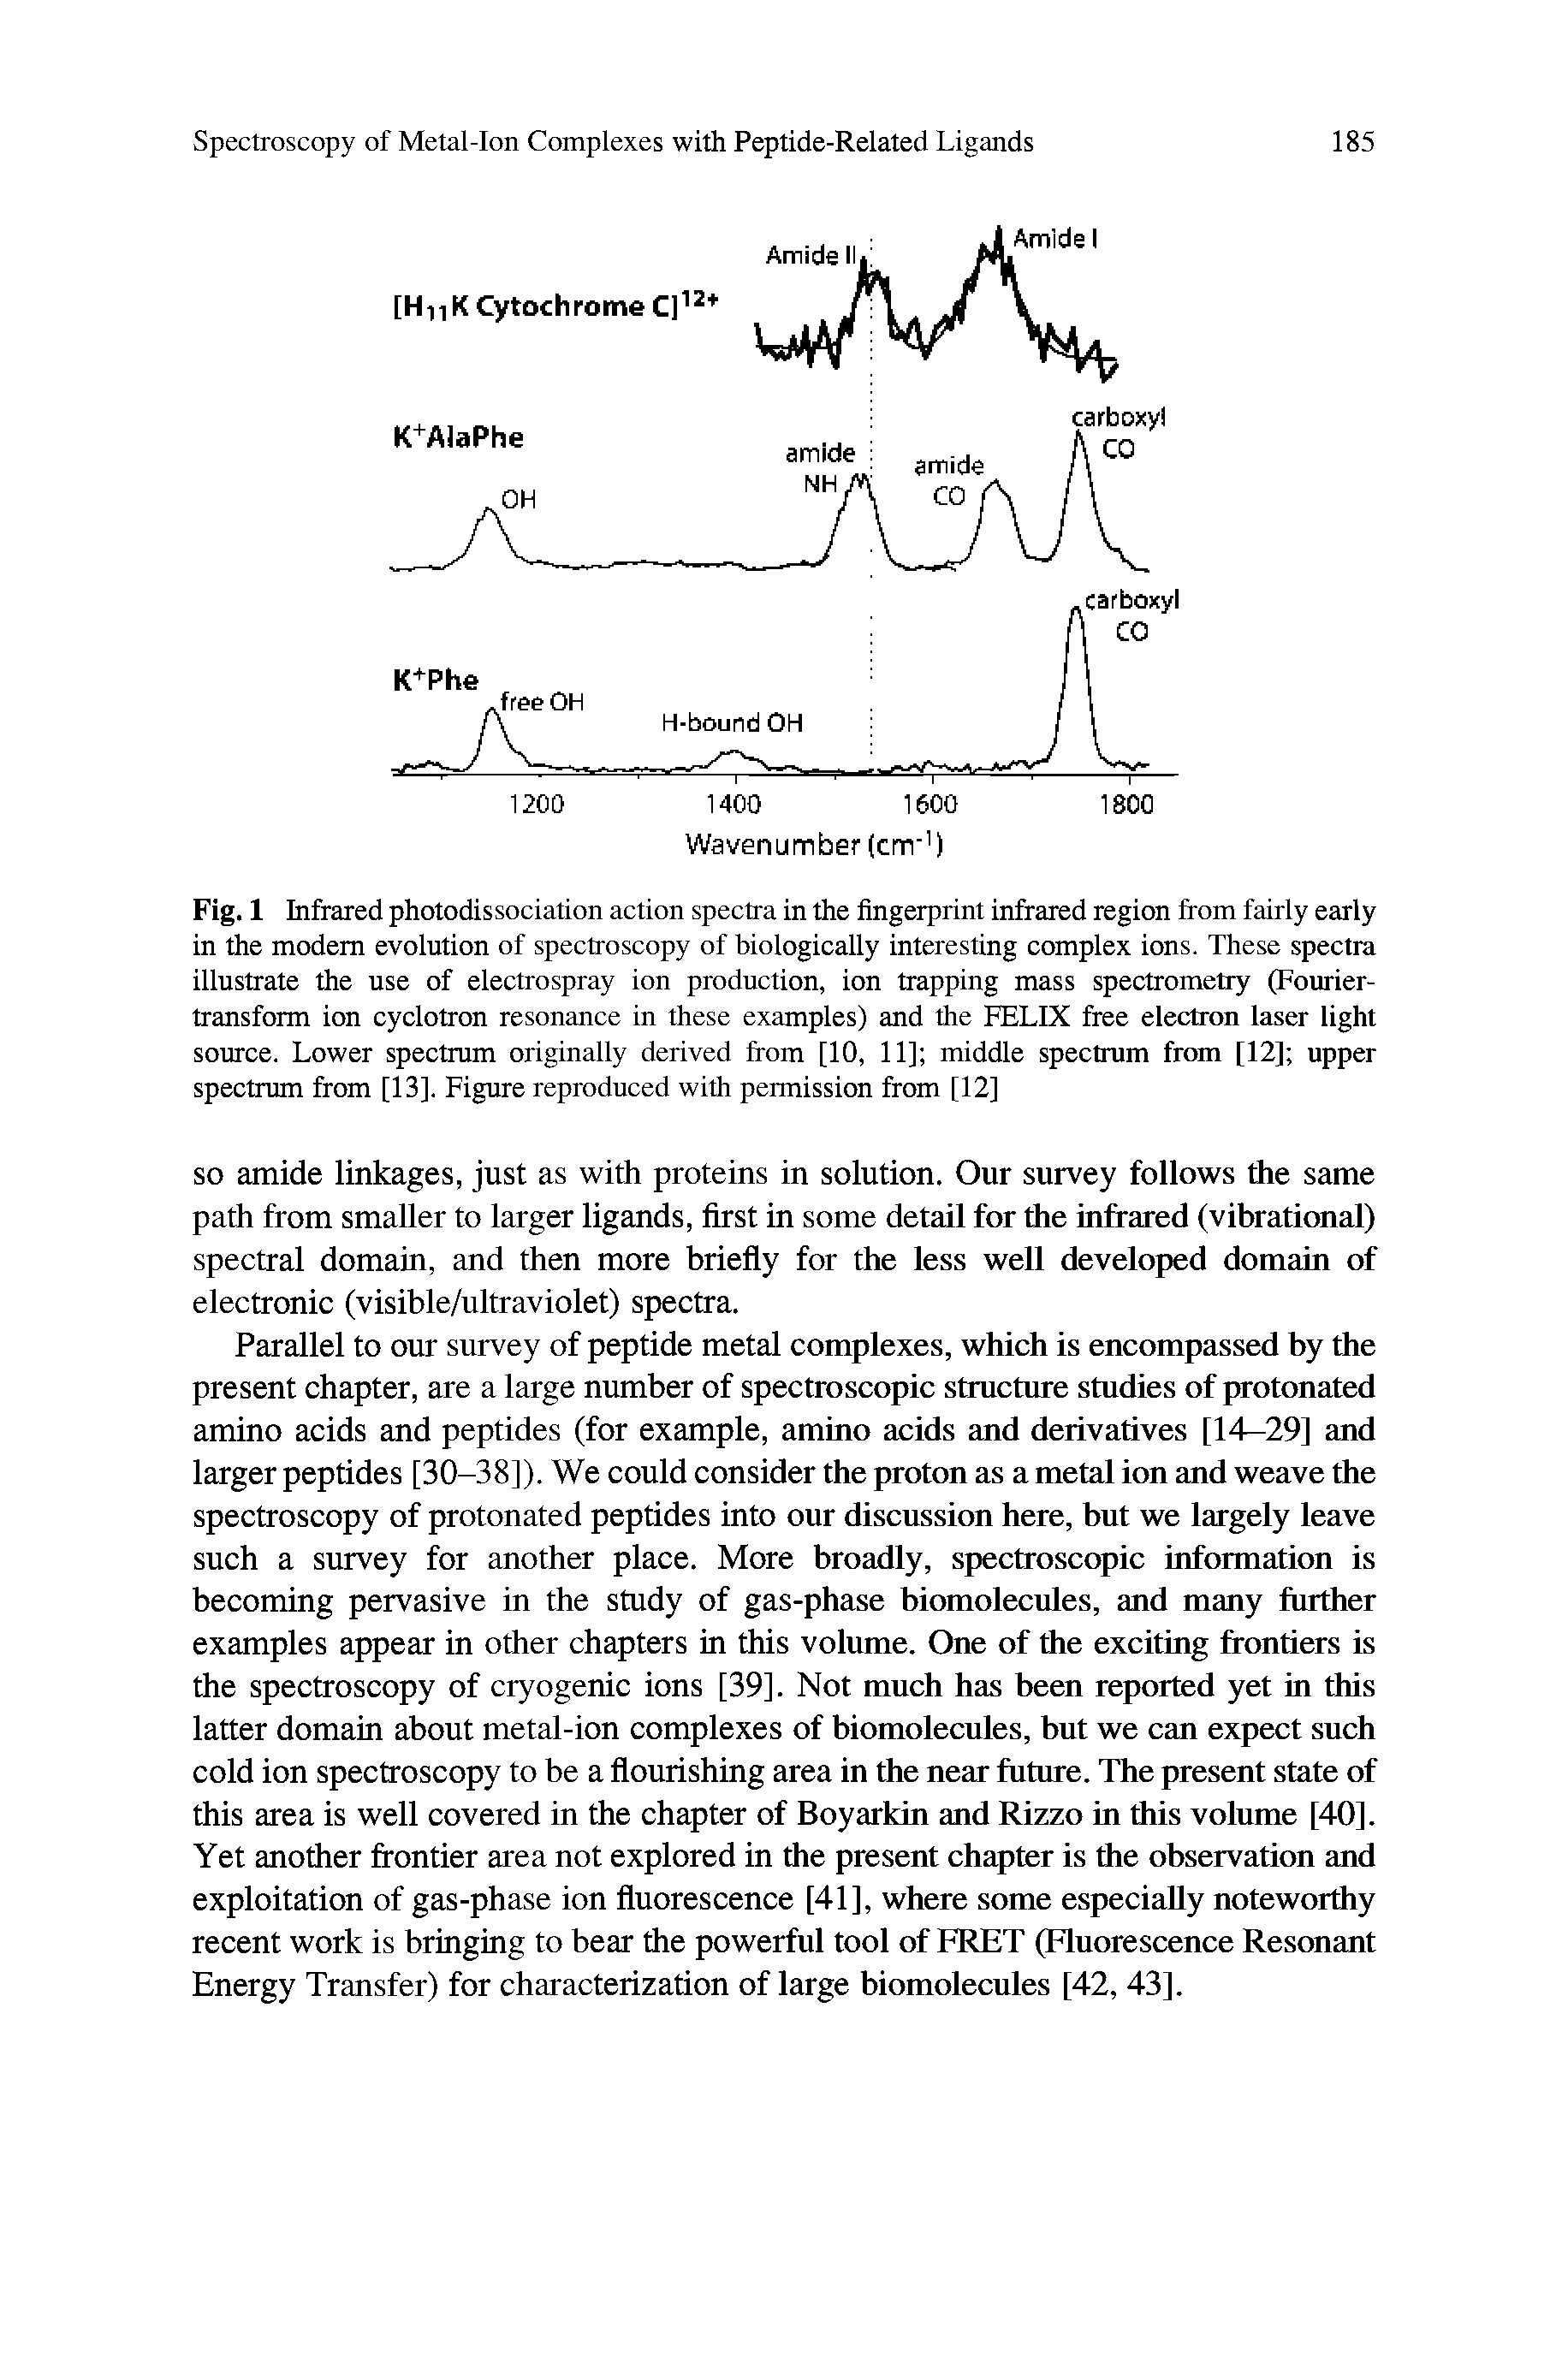 Fig. 1 Infrared photodissociation action spectra in the fingerprint infrared region Irom fairly early in the modem evolution of spectroscopy of biologically interesting complex ions. These spectra illustrate the use of electrospray ion production, ion trapping mass spectrometry (Fourier-transform ion cyclotron resonance in these examples) and the FELIX free electron laser light source. Lower spectrum originally derived from [10, 11] middle spectrum frran [12] upper spectrum from [13]. Figure reproduced with permission from [12]...